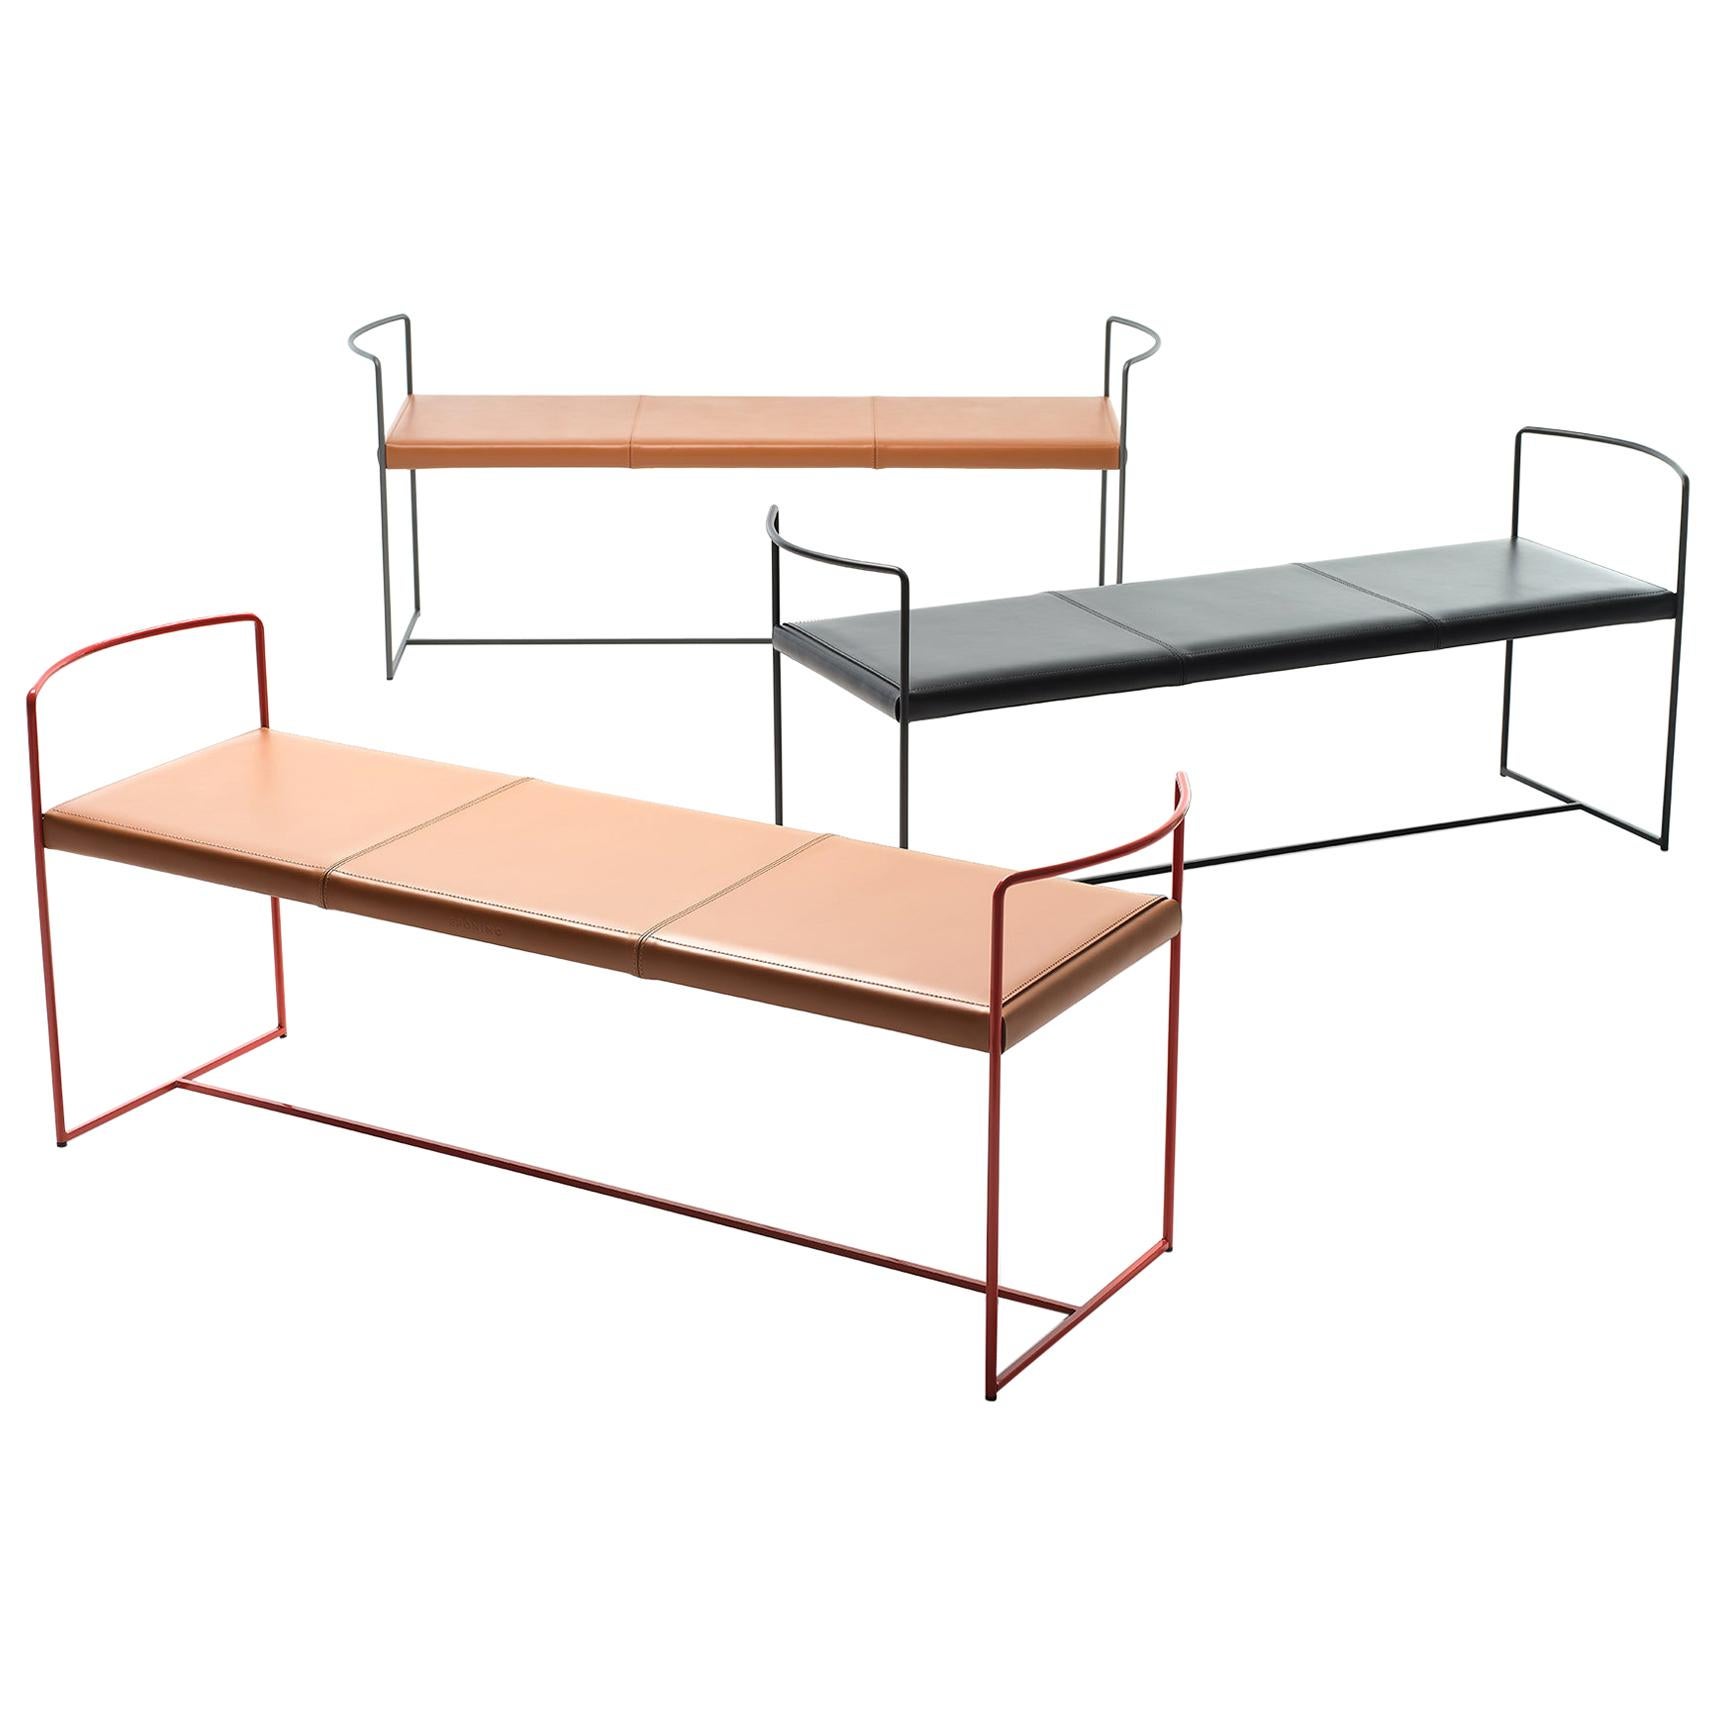 21st Century Modern Bench With Painted Steel Structure And Hide Leather Seat